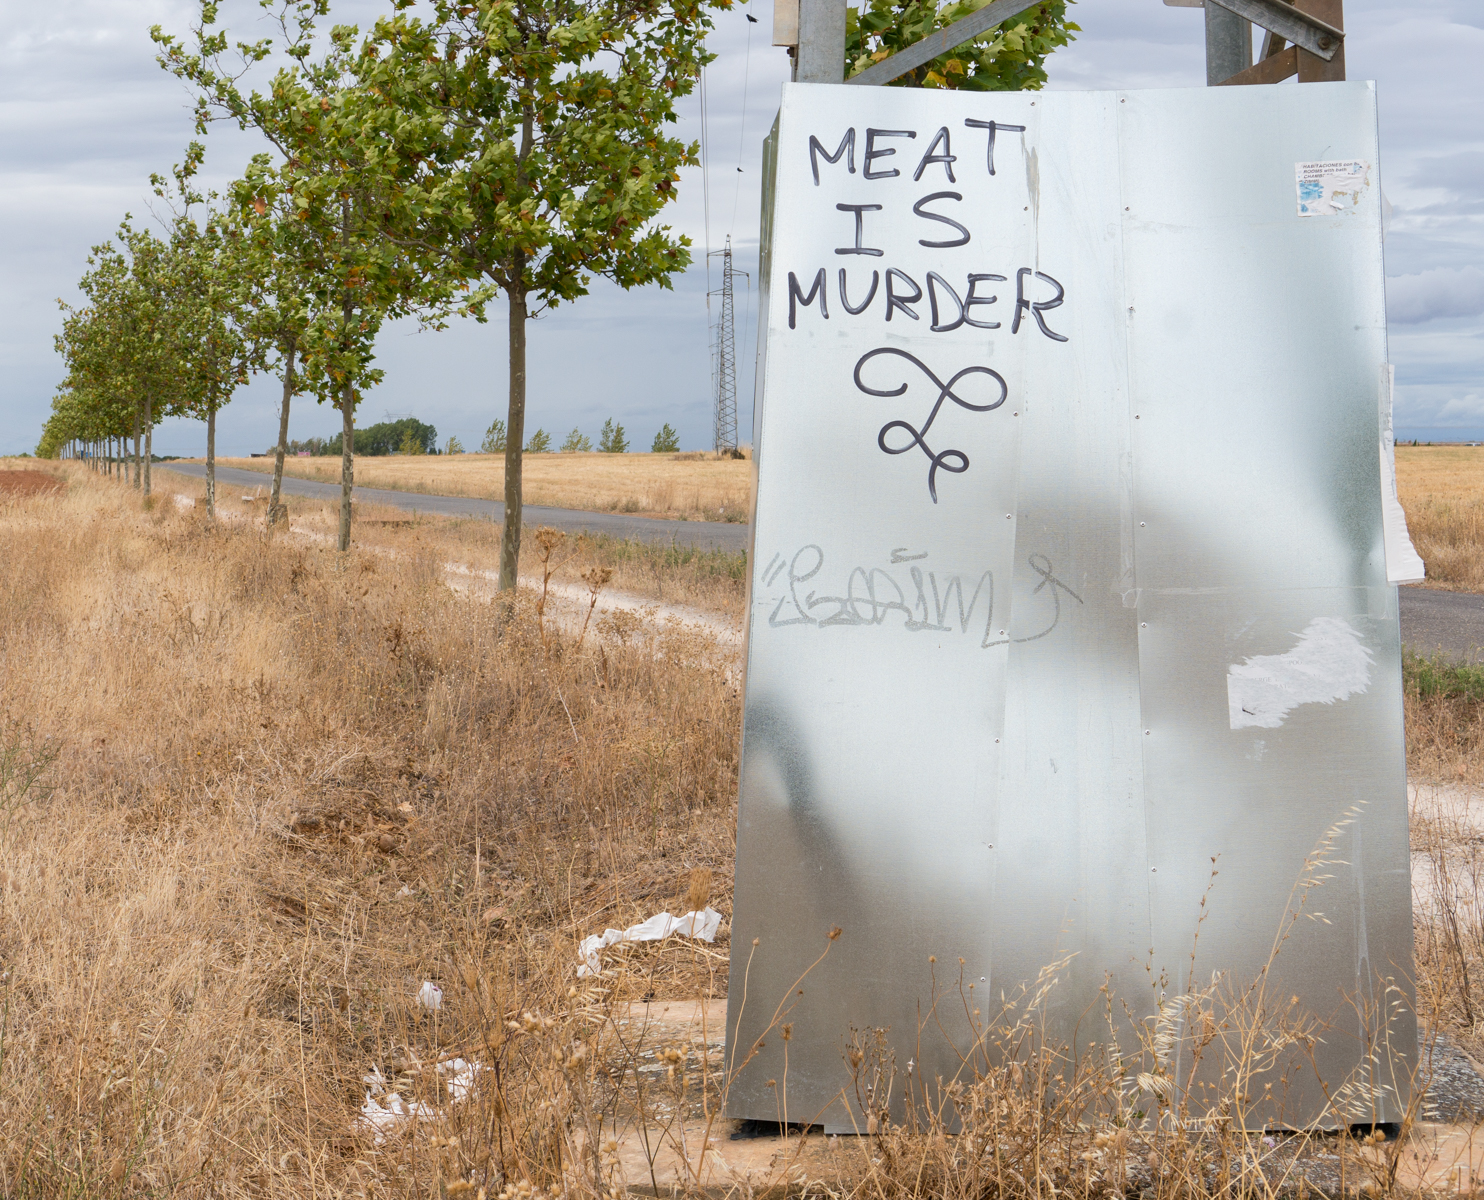 Animal rights graffiti on the Camino Francs west of Sahagun, Spain | Photo by Mike Hudak